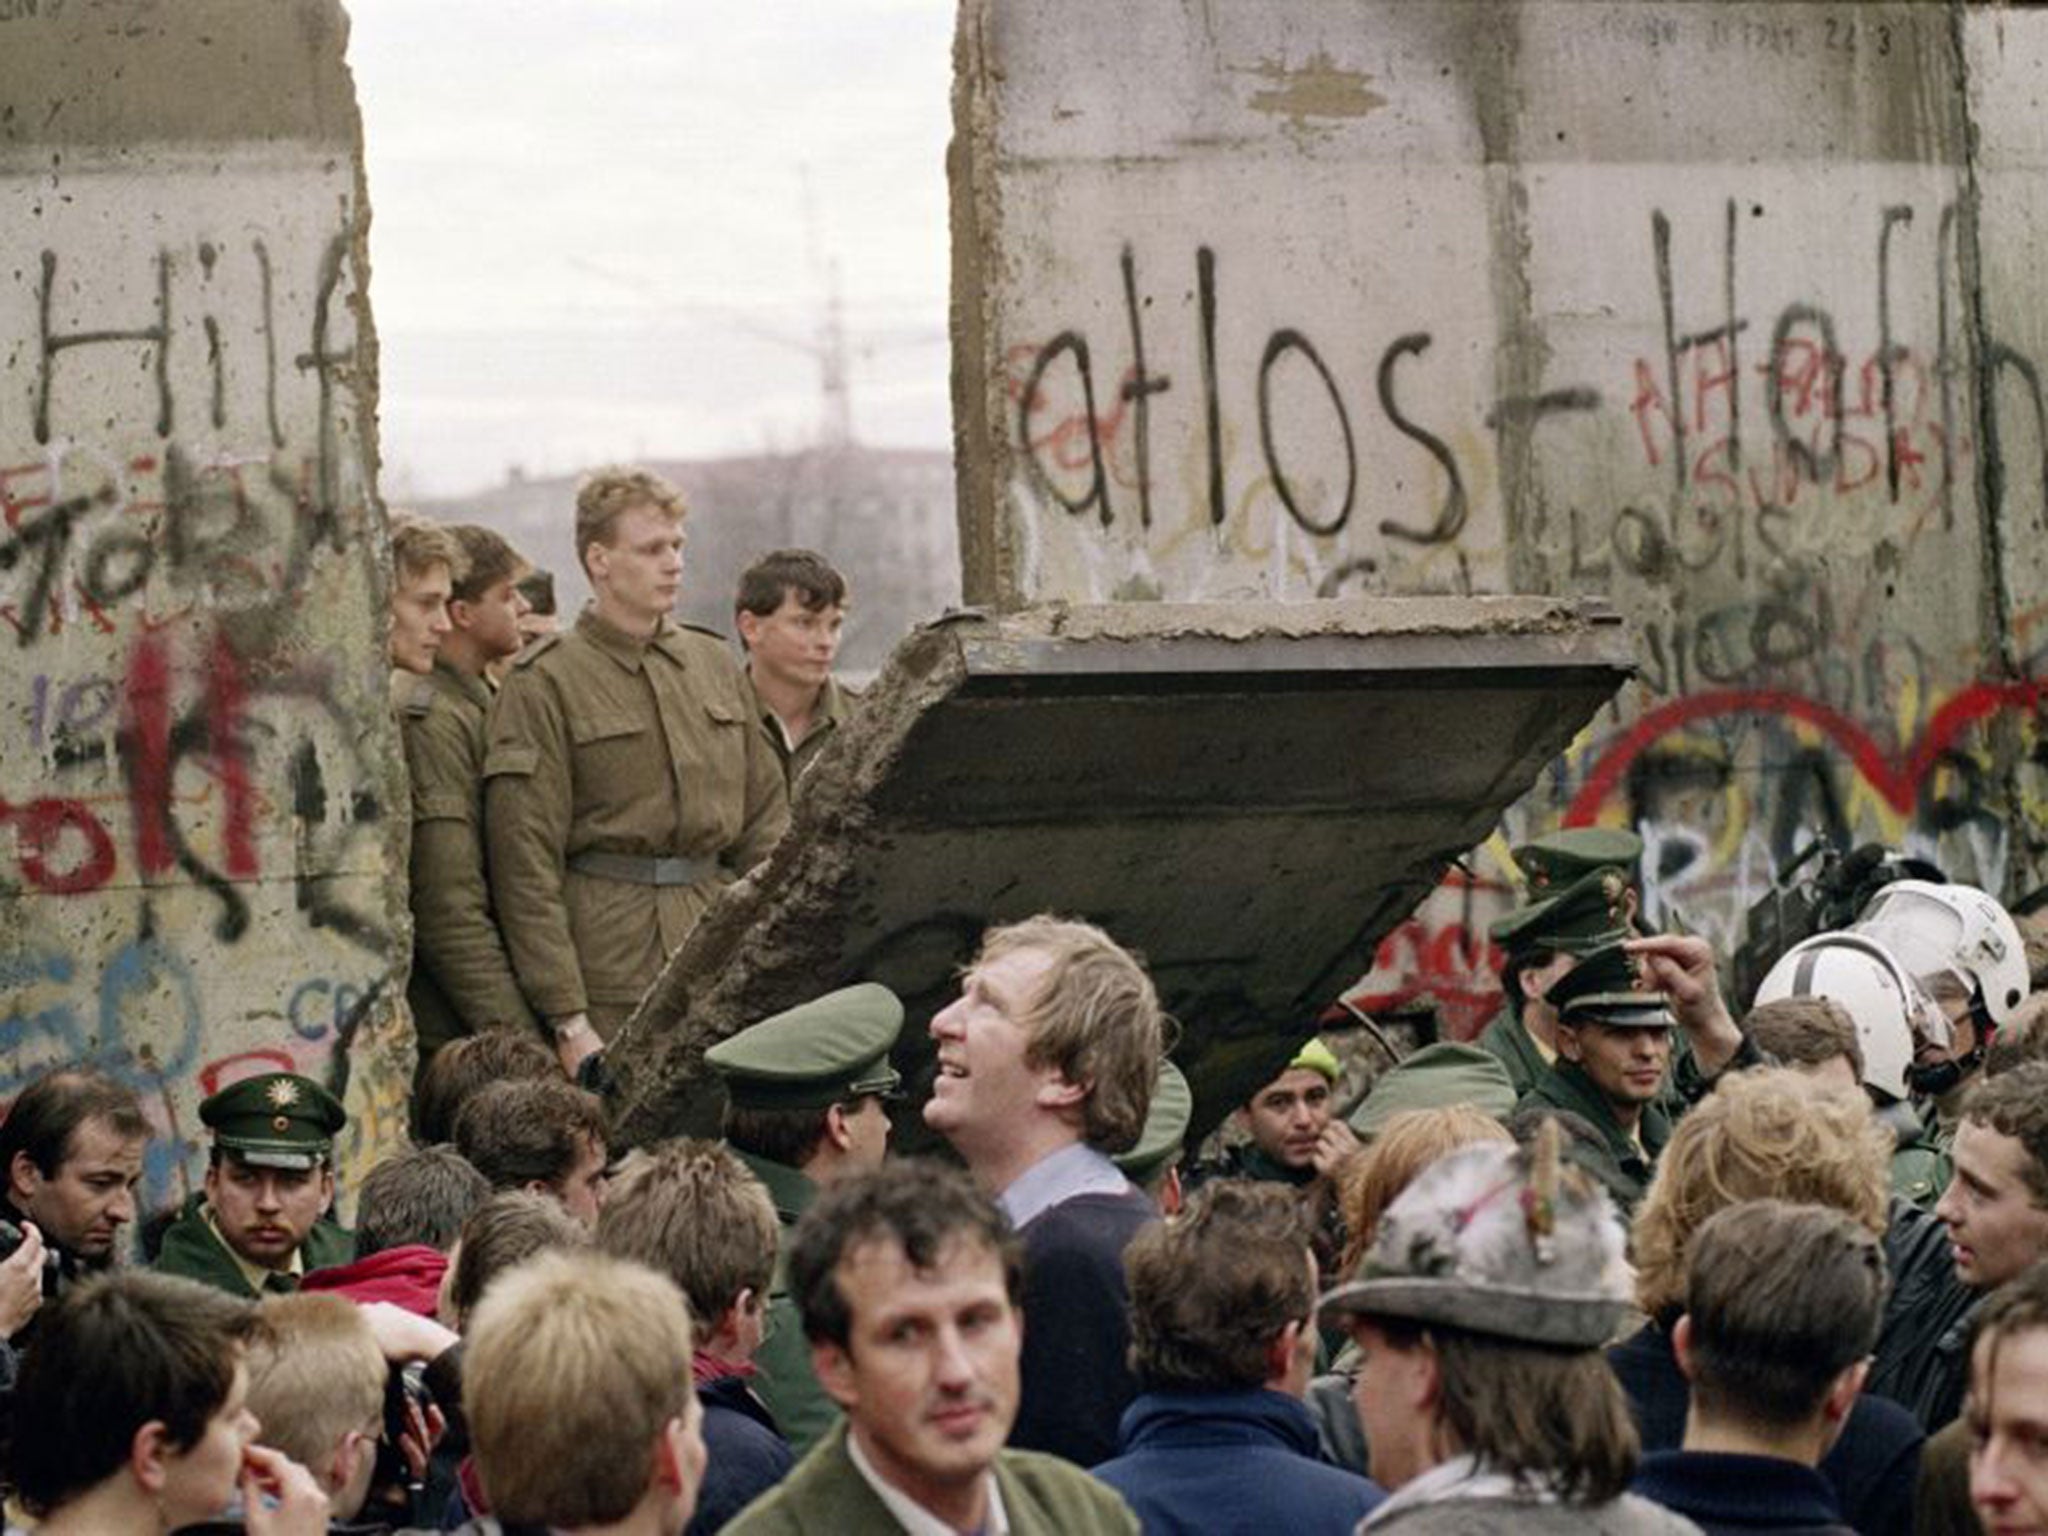 Police from both sides stand idly by as the Berlin Wall is breached for the first time between East and West, at the Sandkrug Bridge crossing-point on Invaliden Strasse, in November 1989